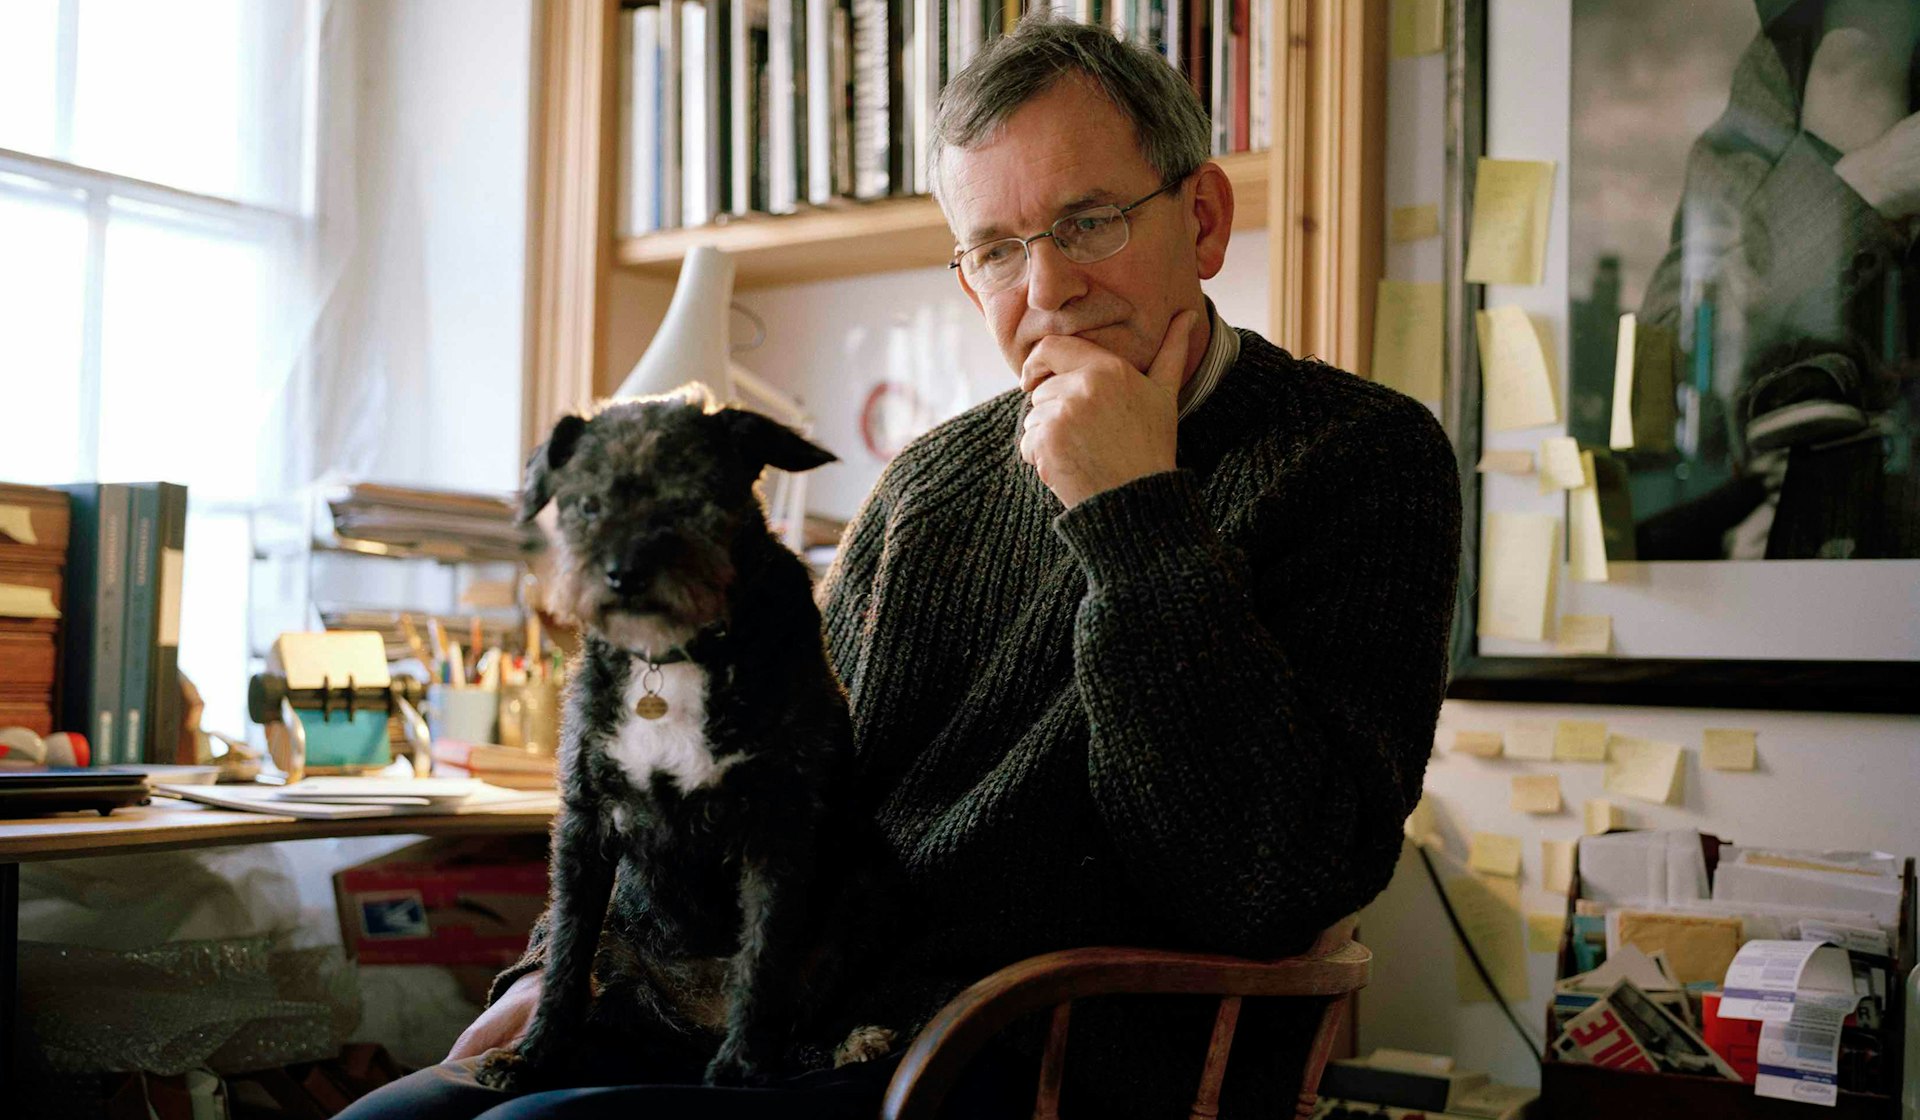 Photographer Martin Parr shares advice on how to succeed as a young artist